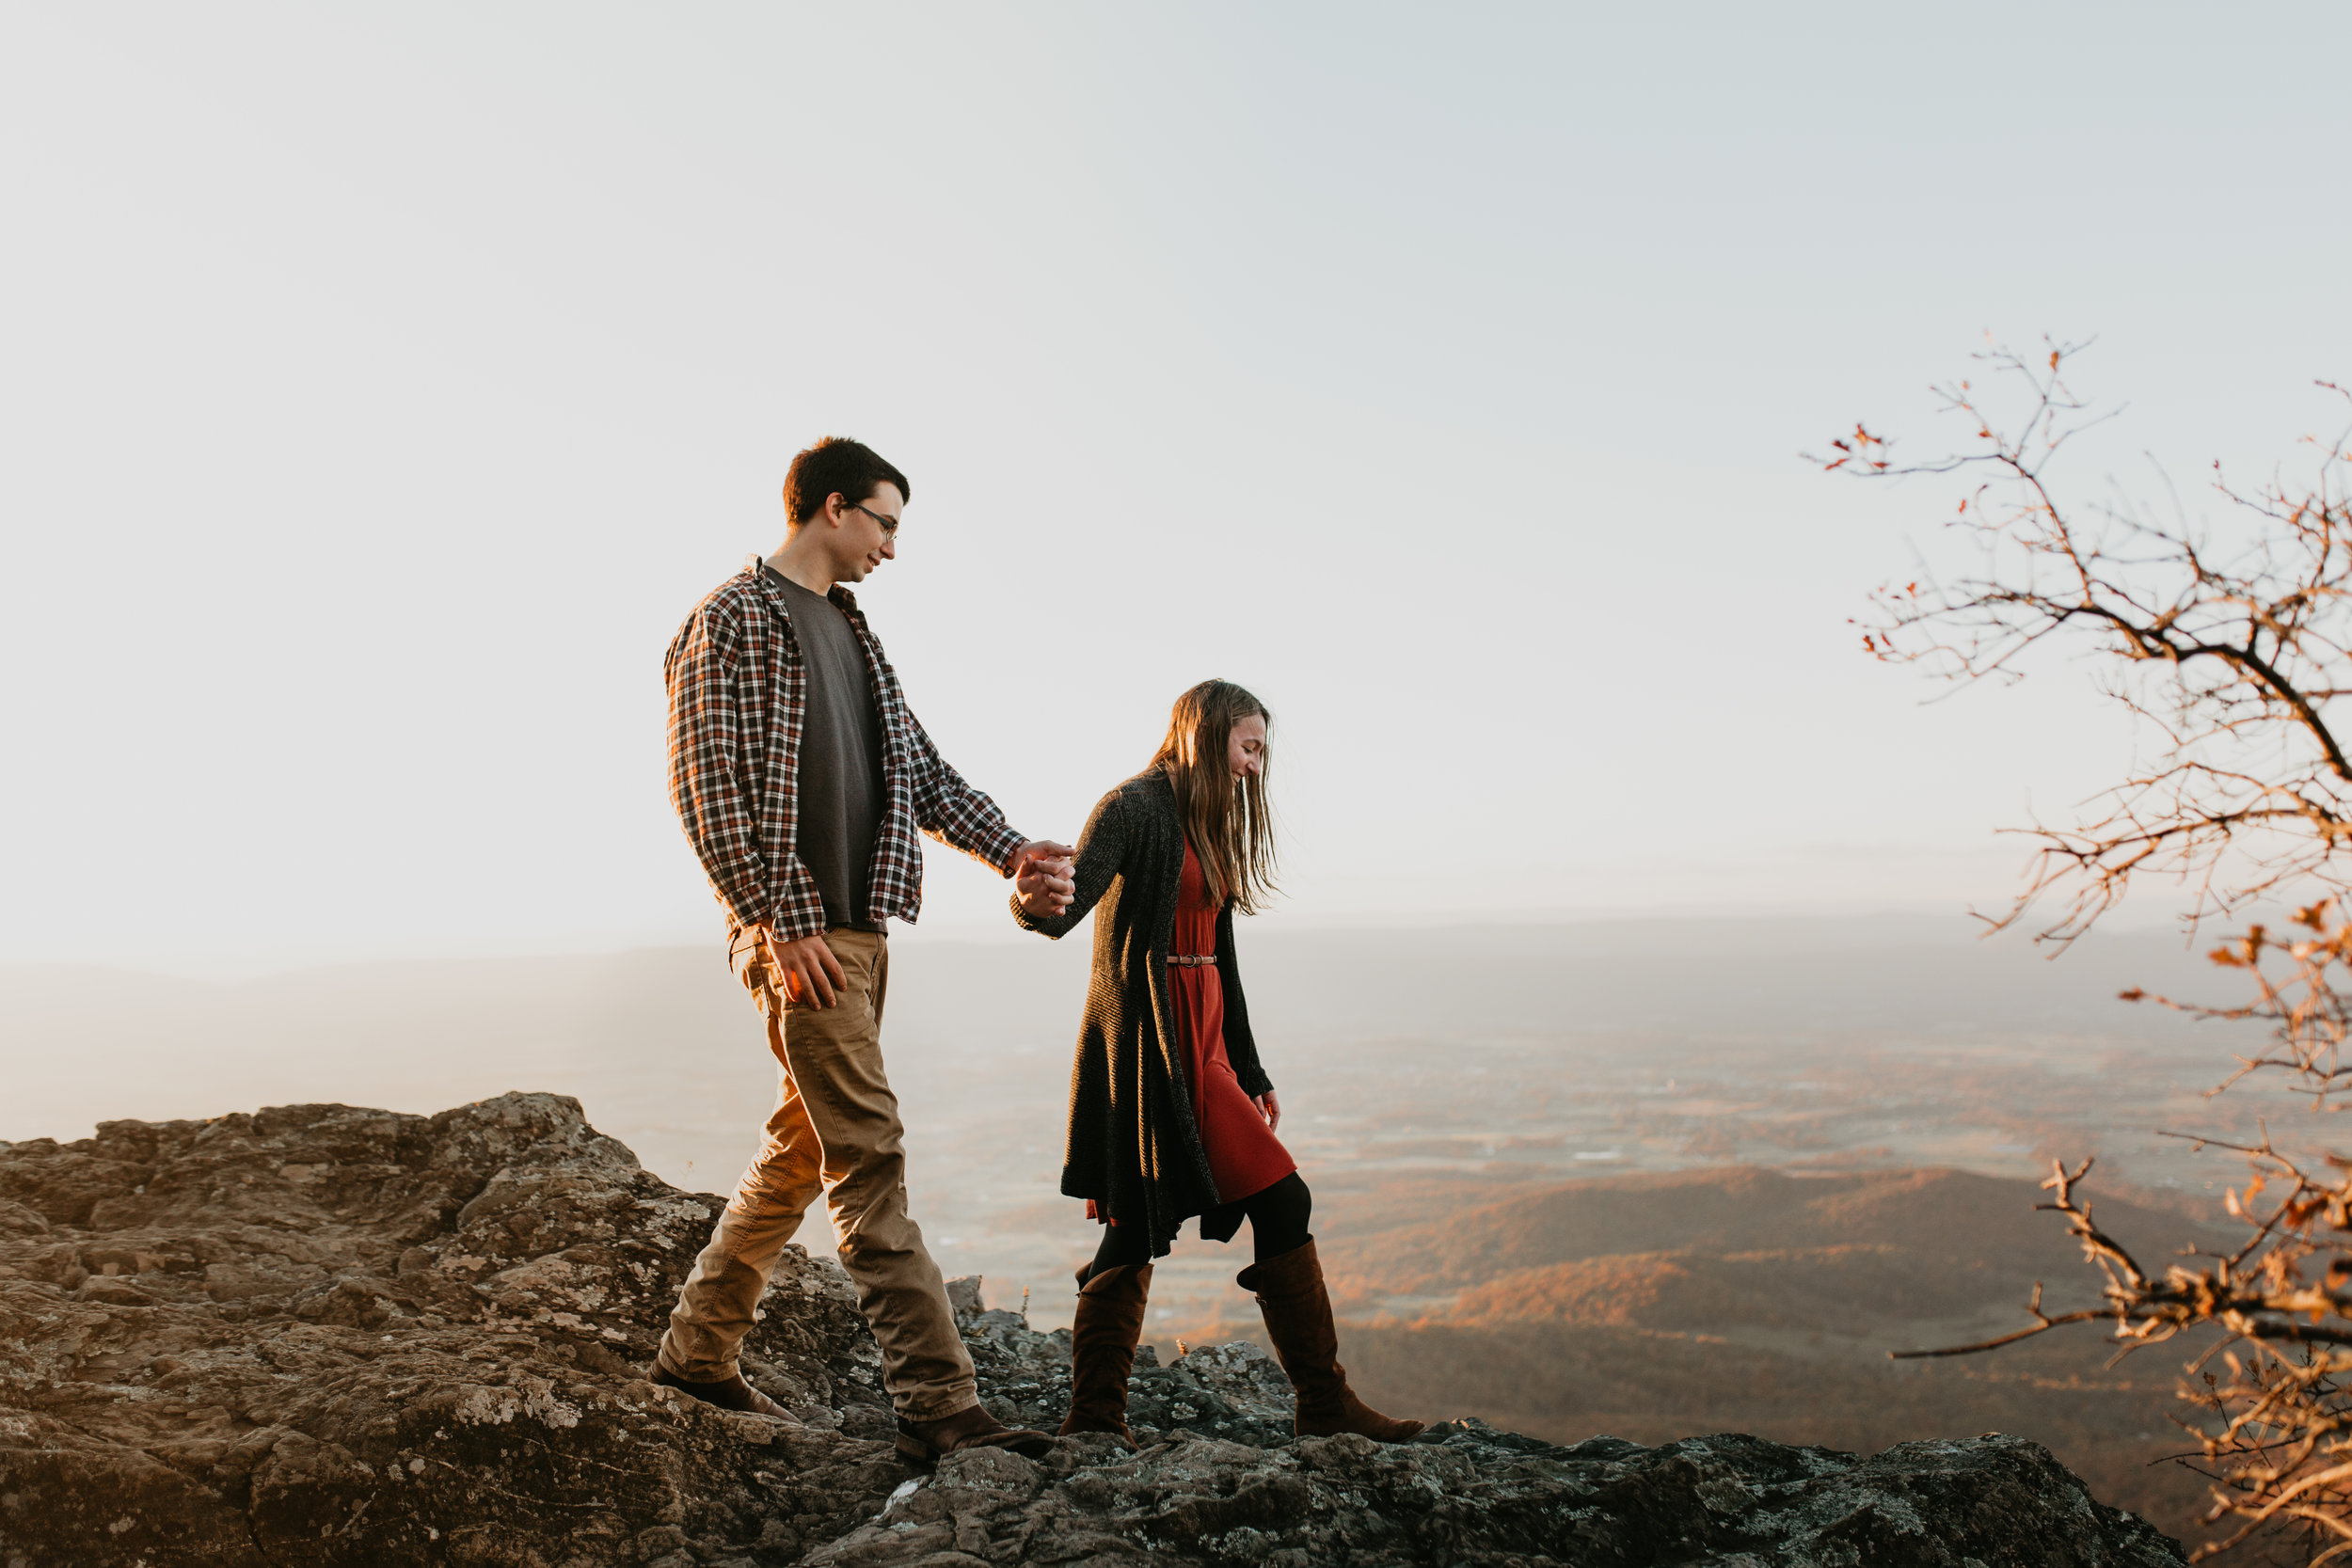 nicole-daacke-photography-shenandoah-national-park-adventure-engagement-session-with-fall-foliage-shenandoah-elopement-photographer-engagement-photos-in-virginia-charlottesville-national-park-adventure-elopement-photographer-3880.jpg